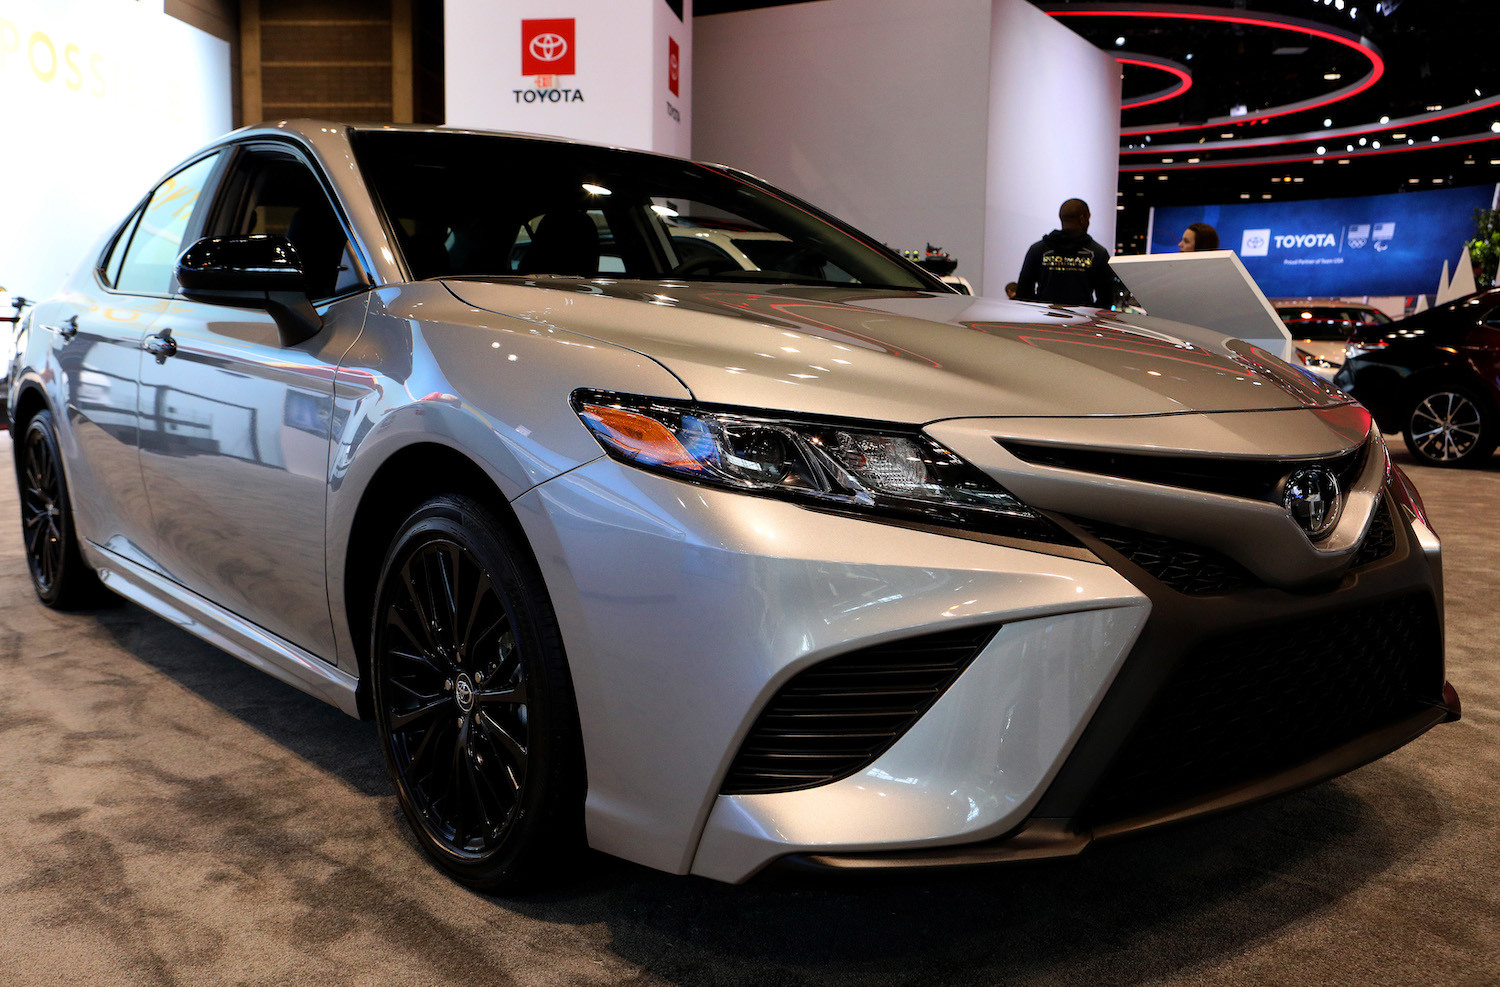 Toyota Camry Hybrid on display in Chicago